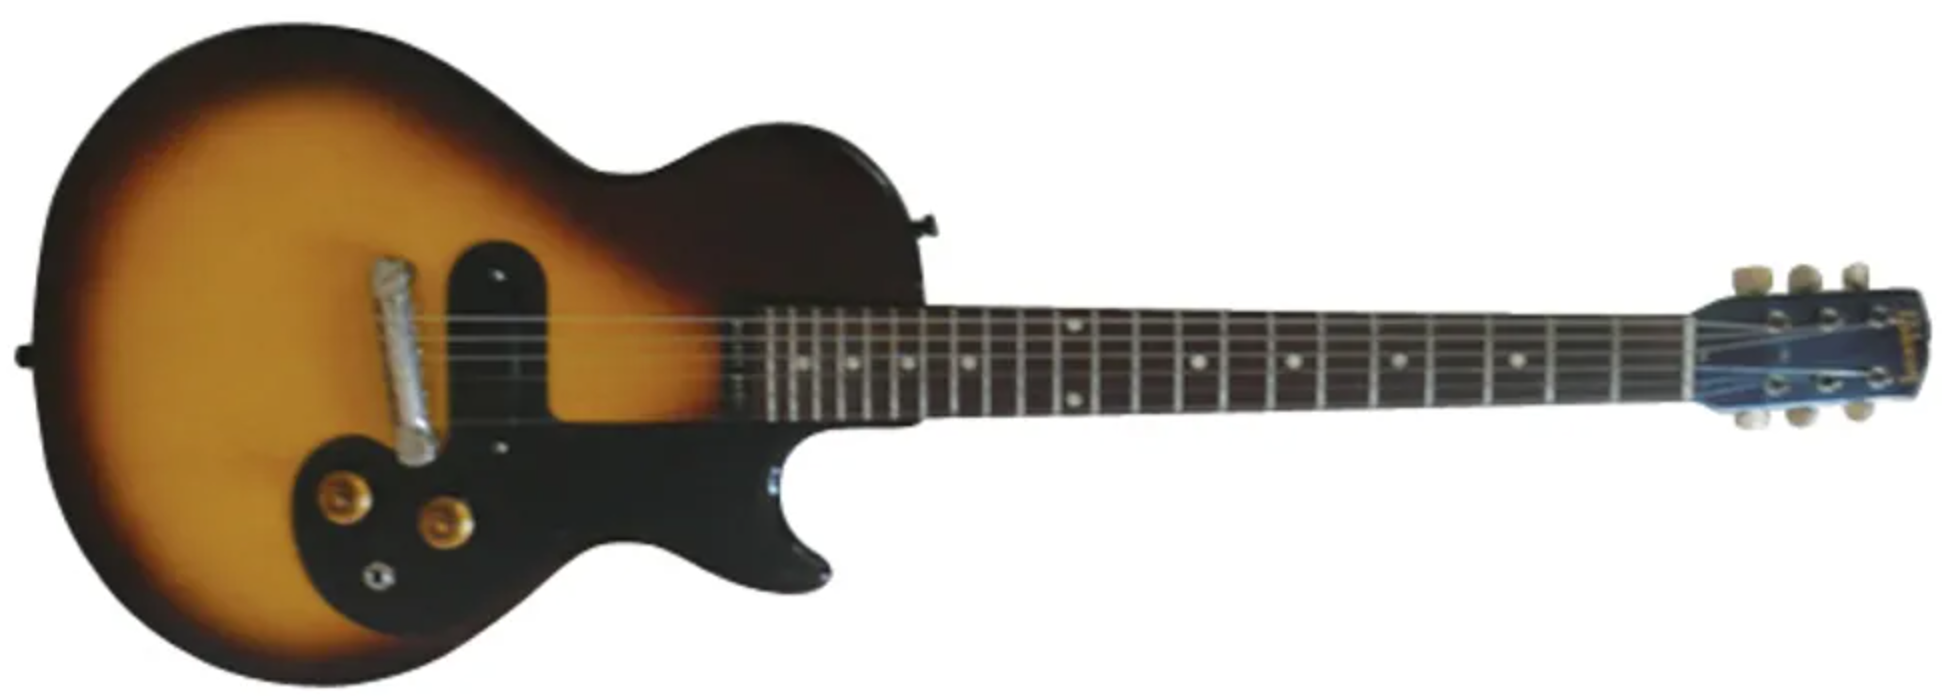 gibson melody maker